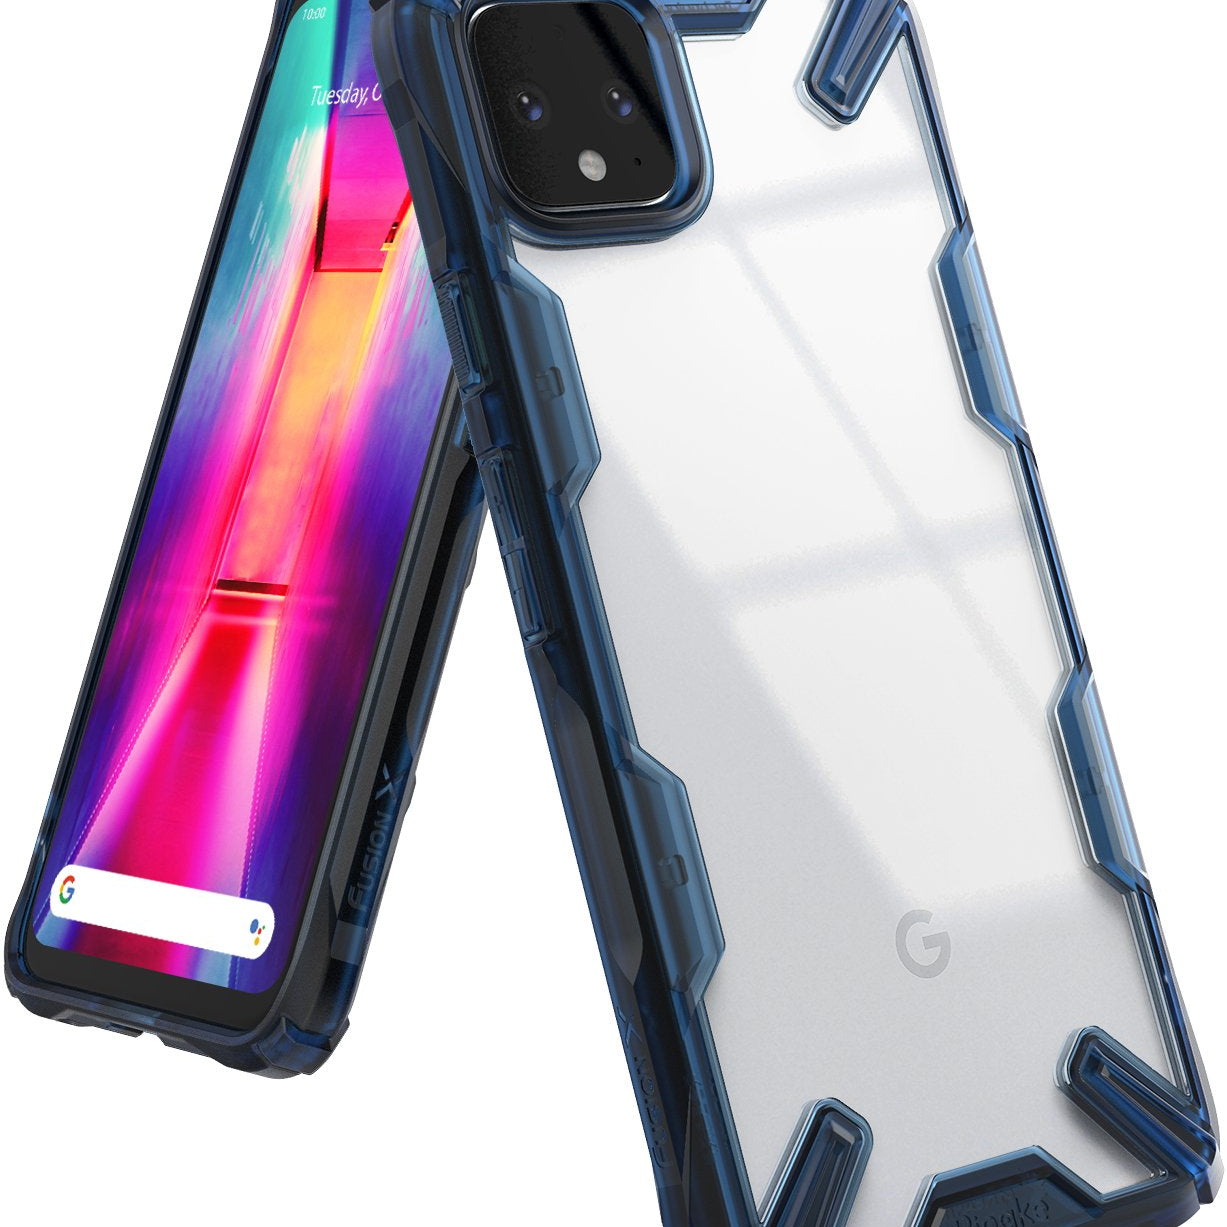 Ringke Fusion-X Case compatible with Google Pixel 4 XL, Space Blue